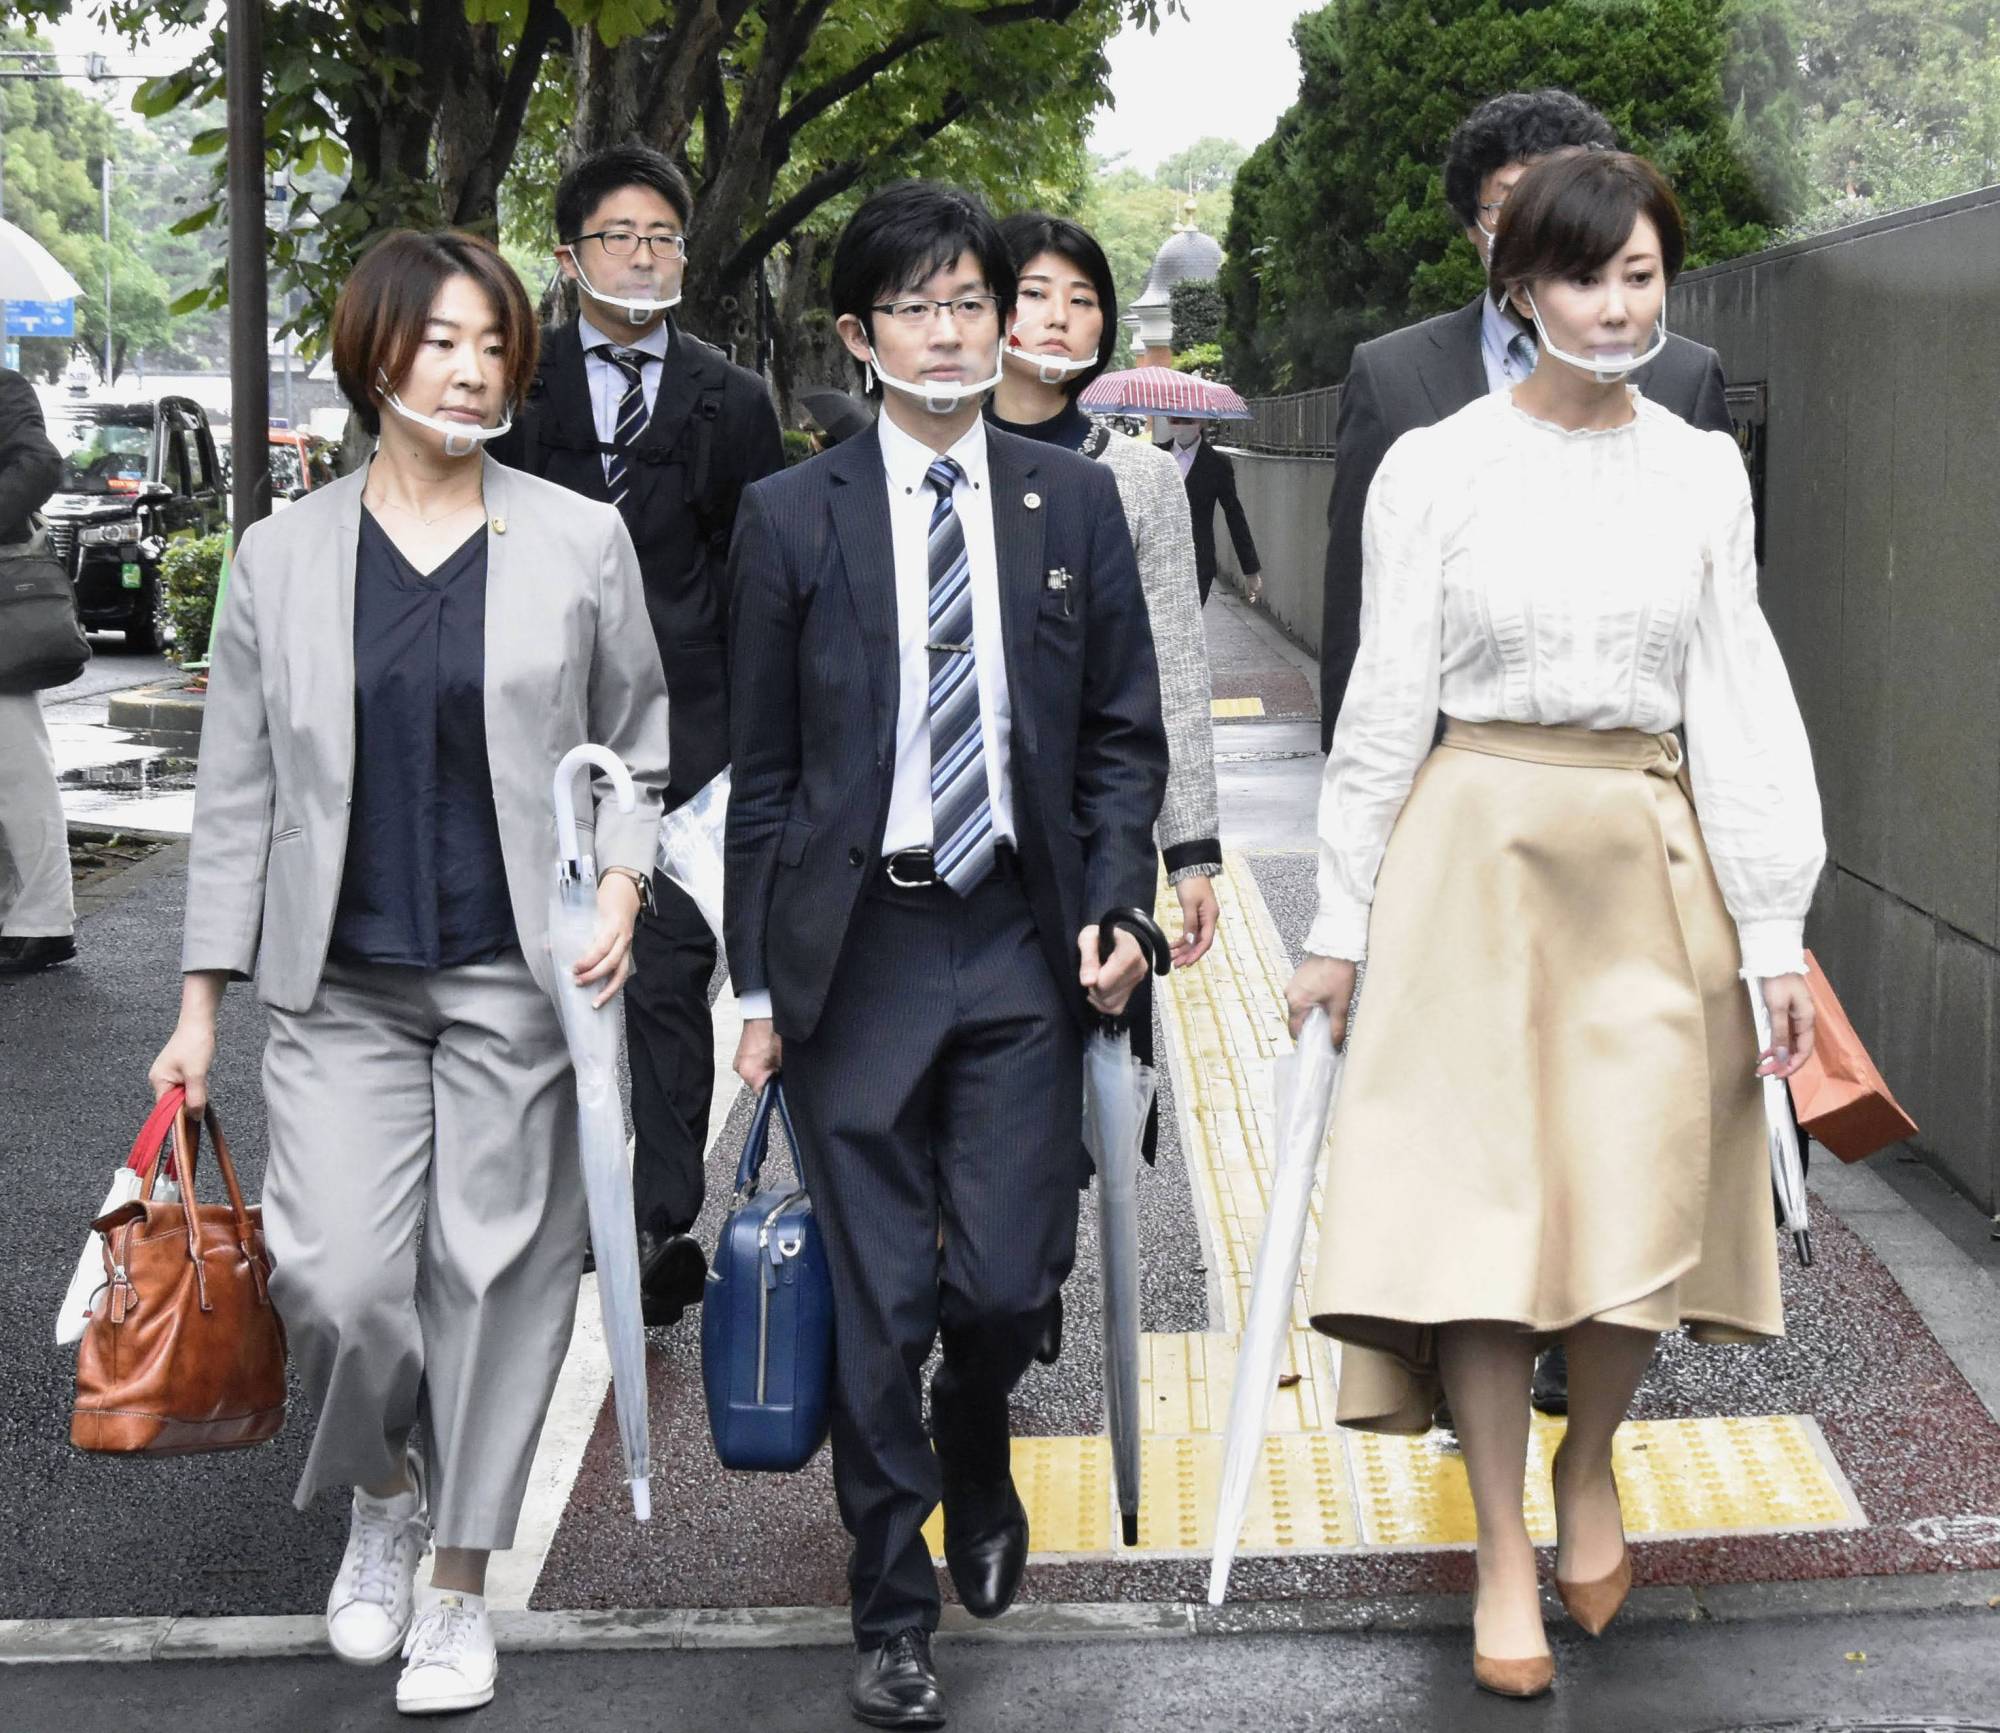 Shocking discrimination Japans sex industry cries foul over exclusion from government pic